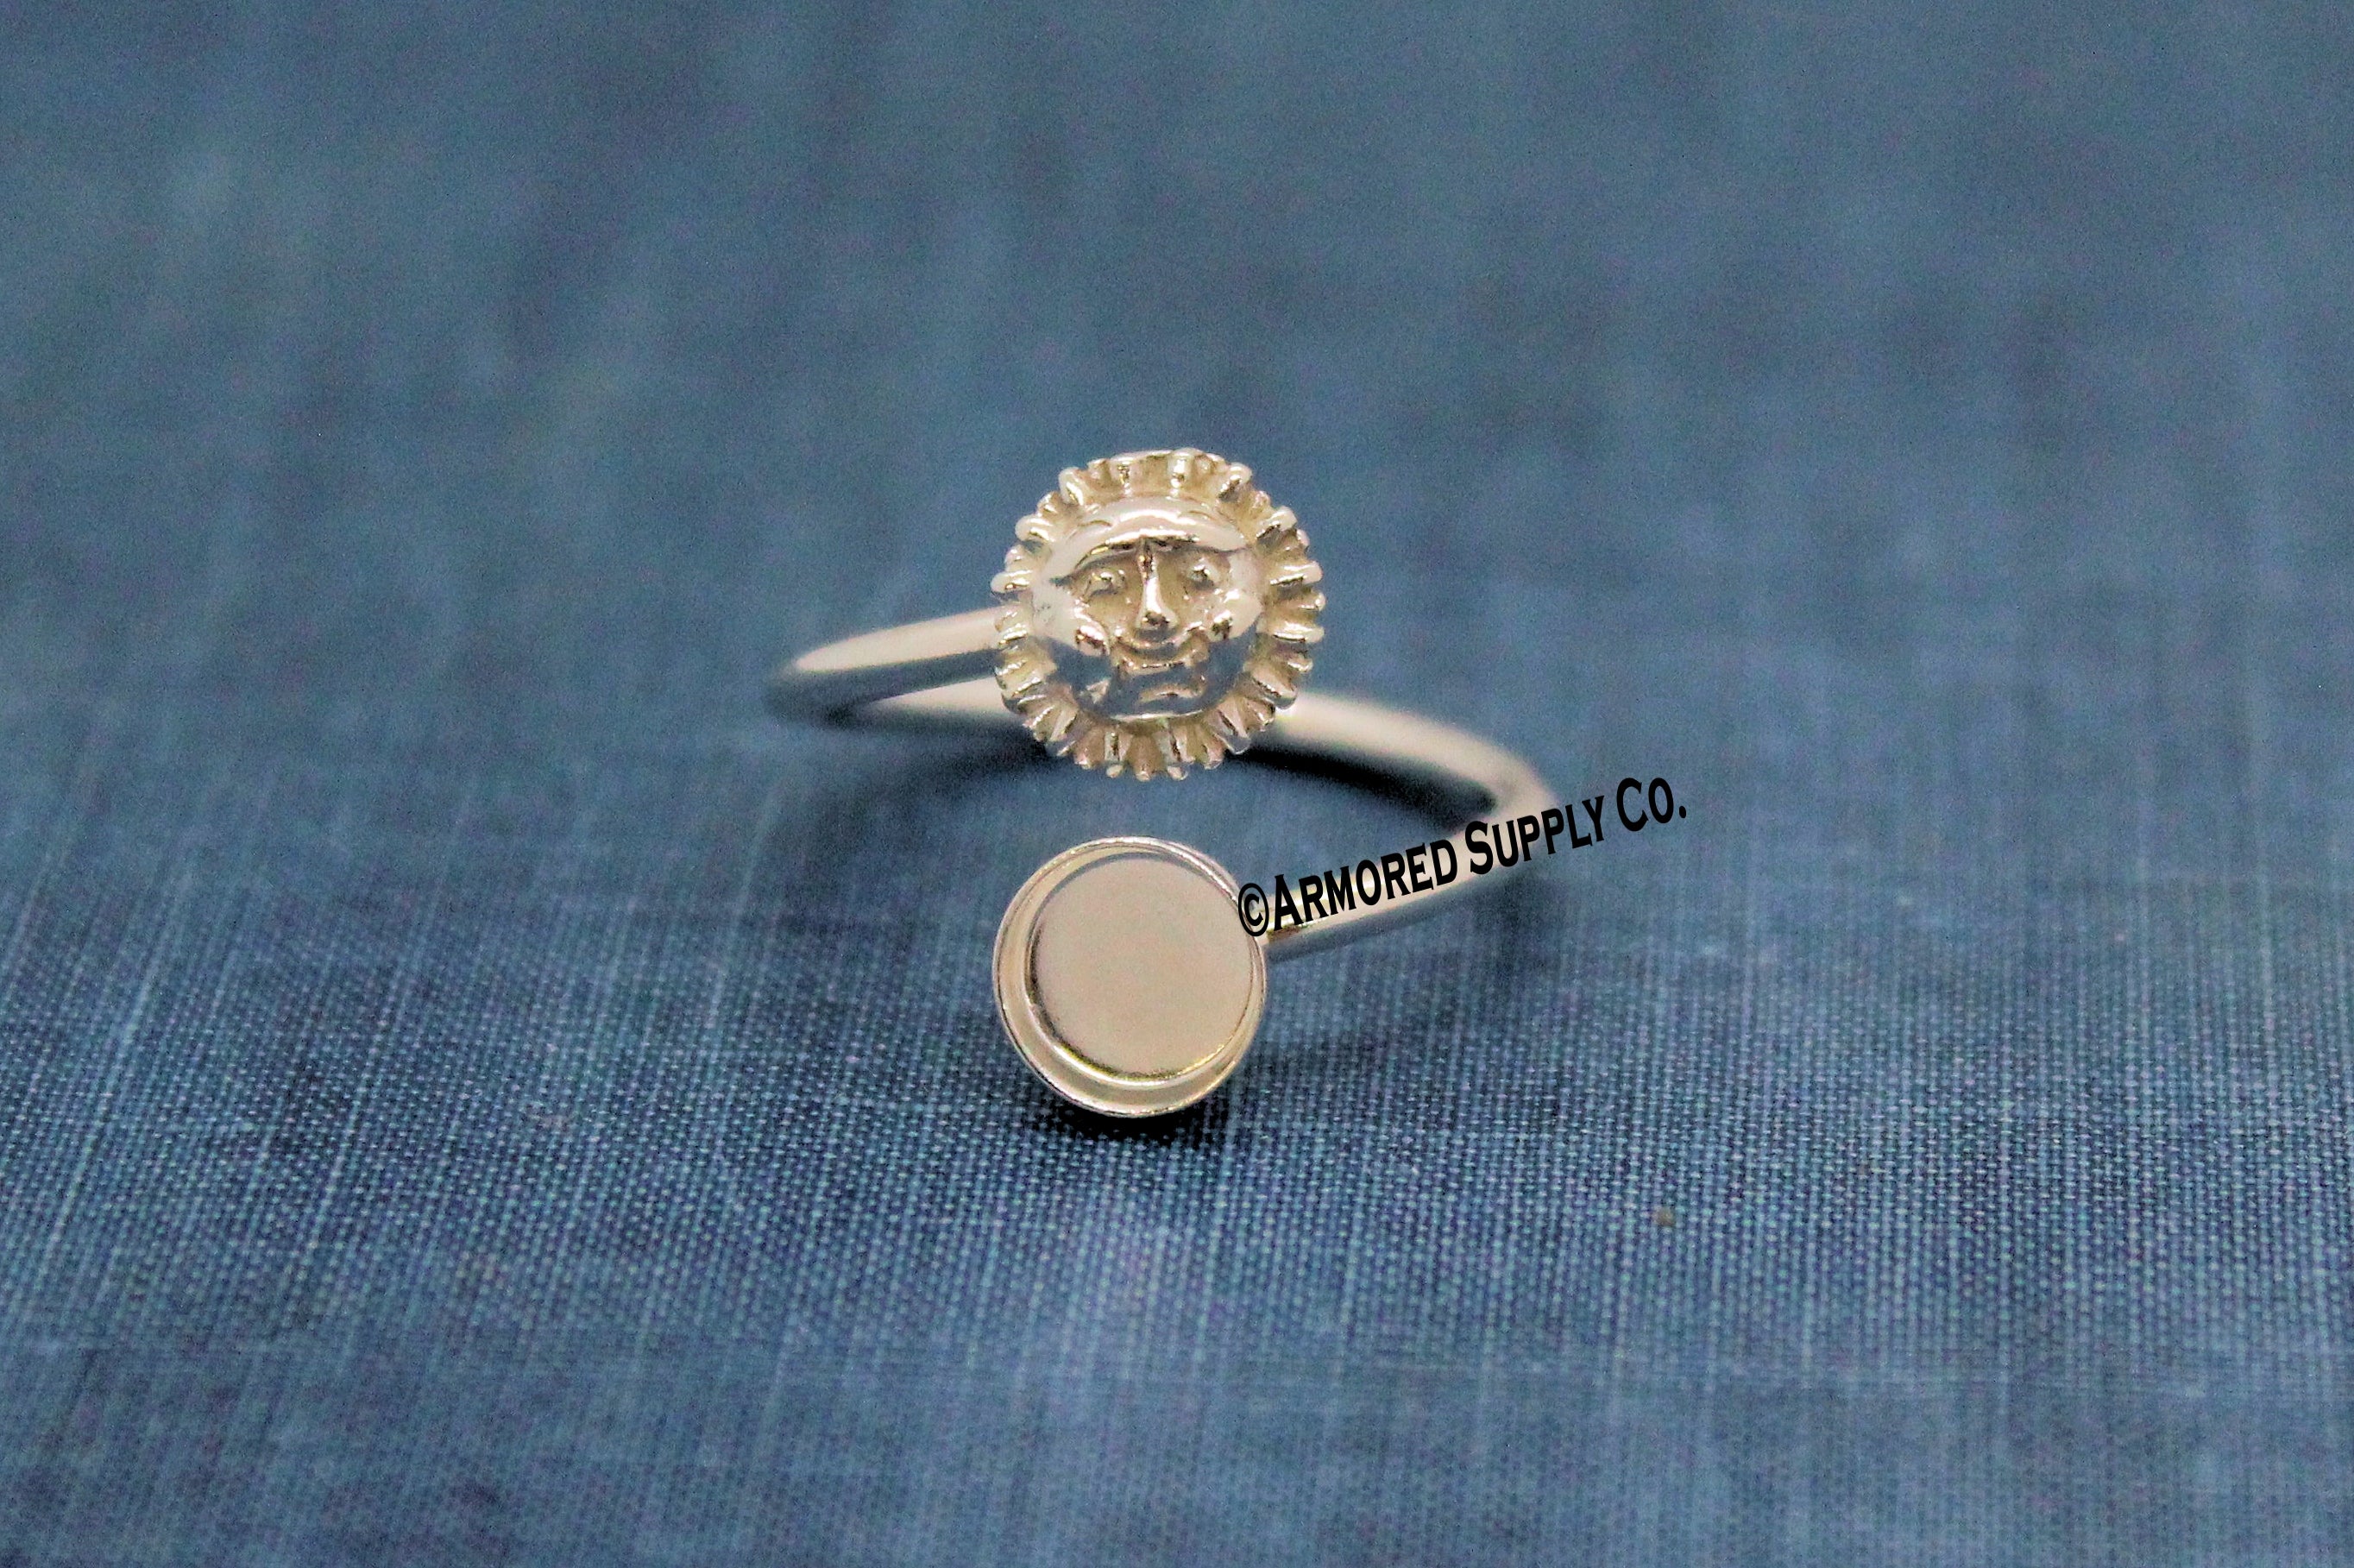 5mm Bezel Sterling Silver Smiling Sun Wrap Bypass Adjustable Ring blank